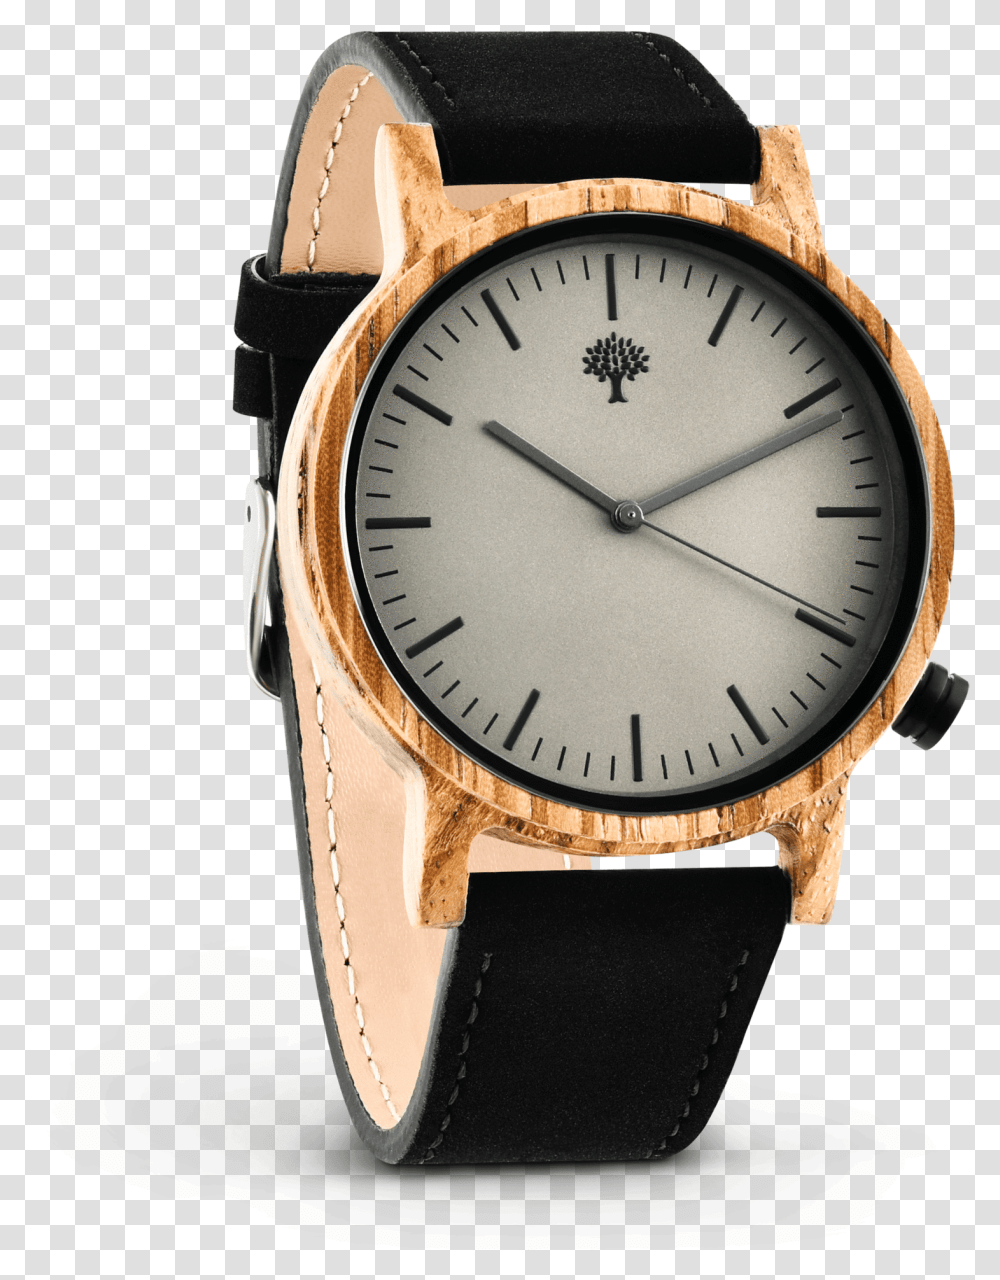 The Gaston Wood Watch Zebra Wood Black Leather Analog Watch, Wristwatch, Clock Tower, Architecture, Building Transparent Png